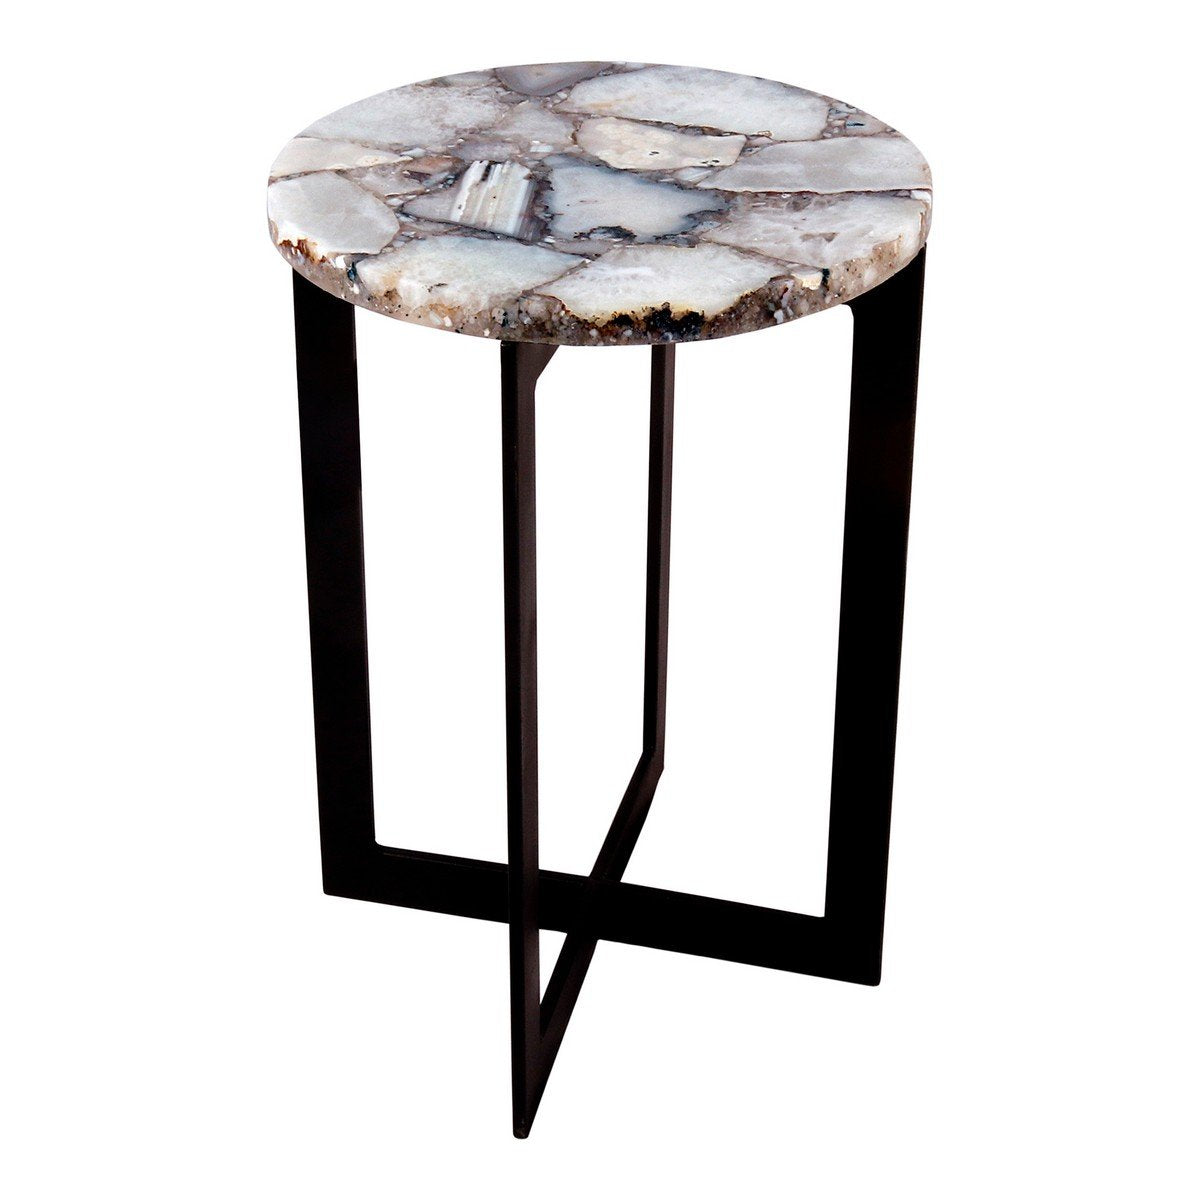 Moe's Home Collection Blanca Agate Accent Table - PJ-1012-18 - Moe's Home Collection - side tables - Minimal And Modern - 1